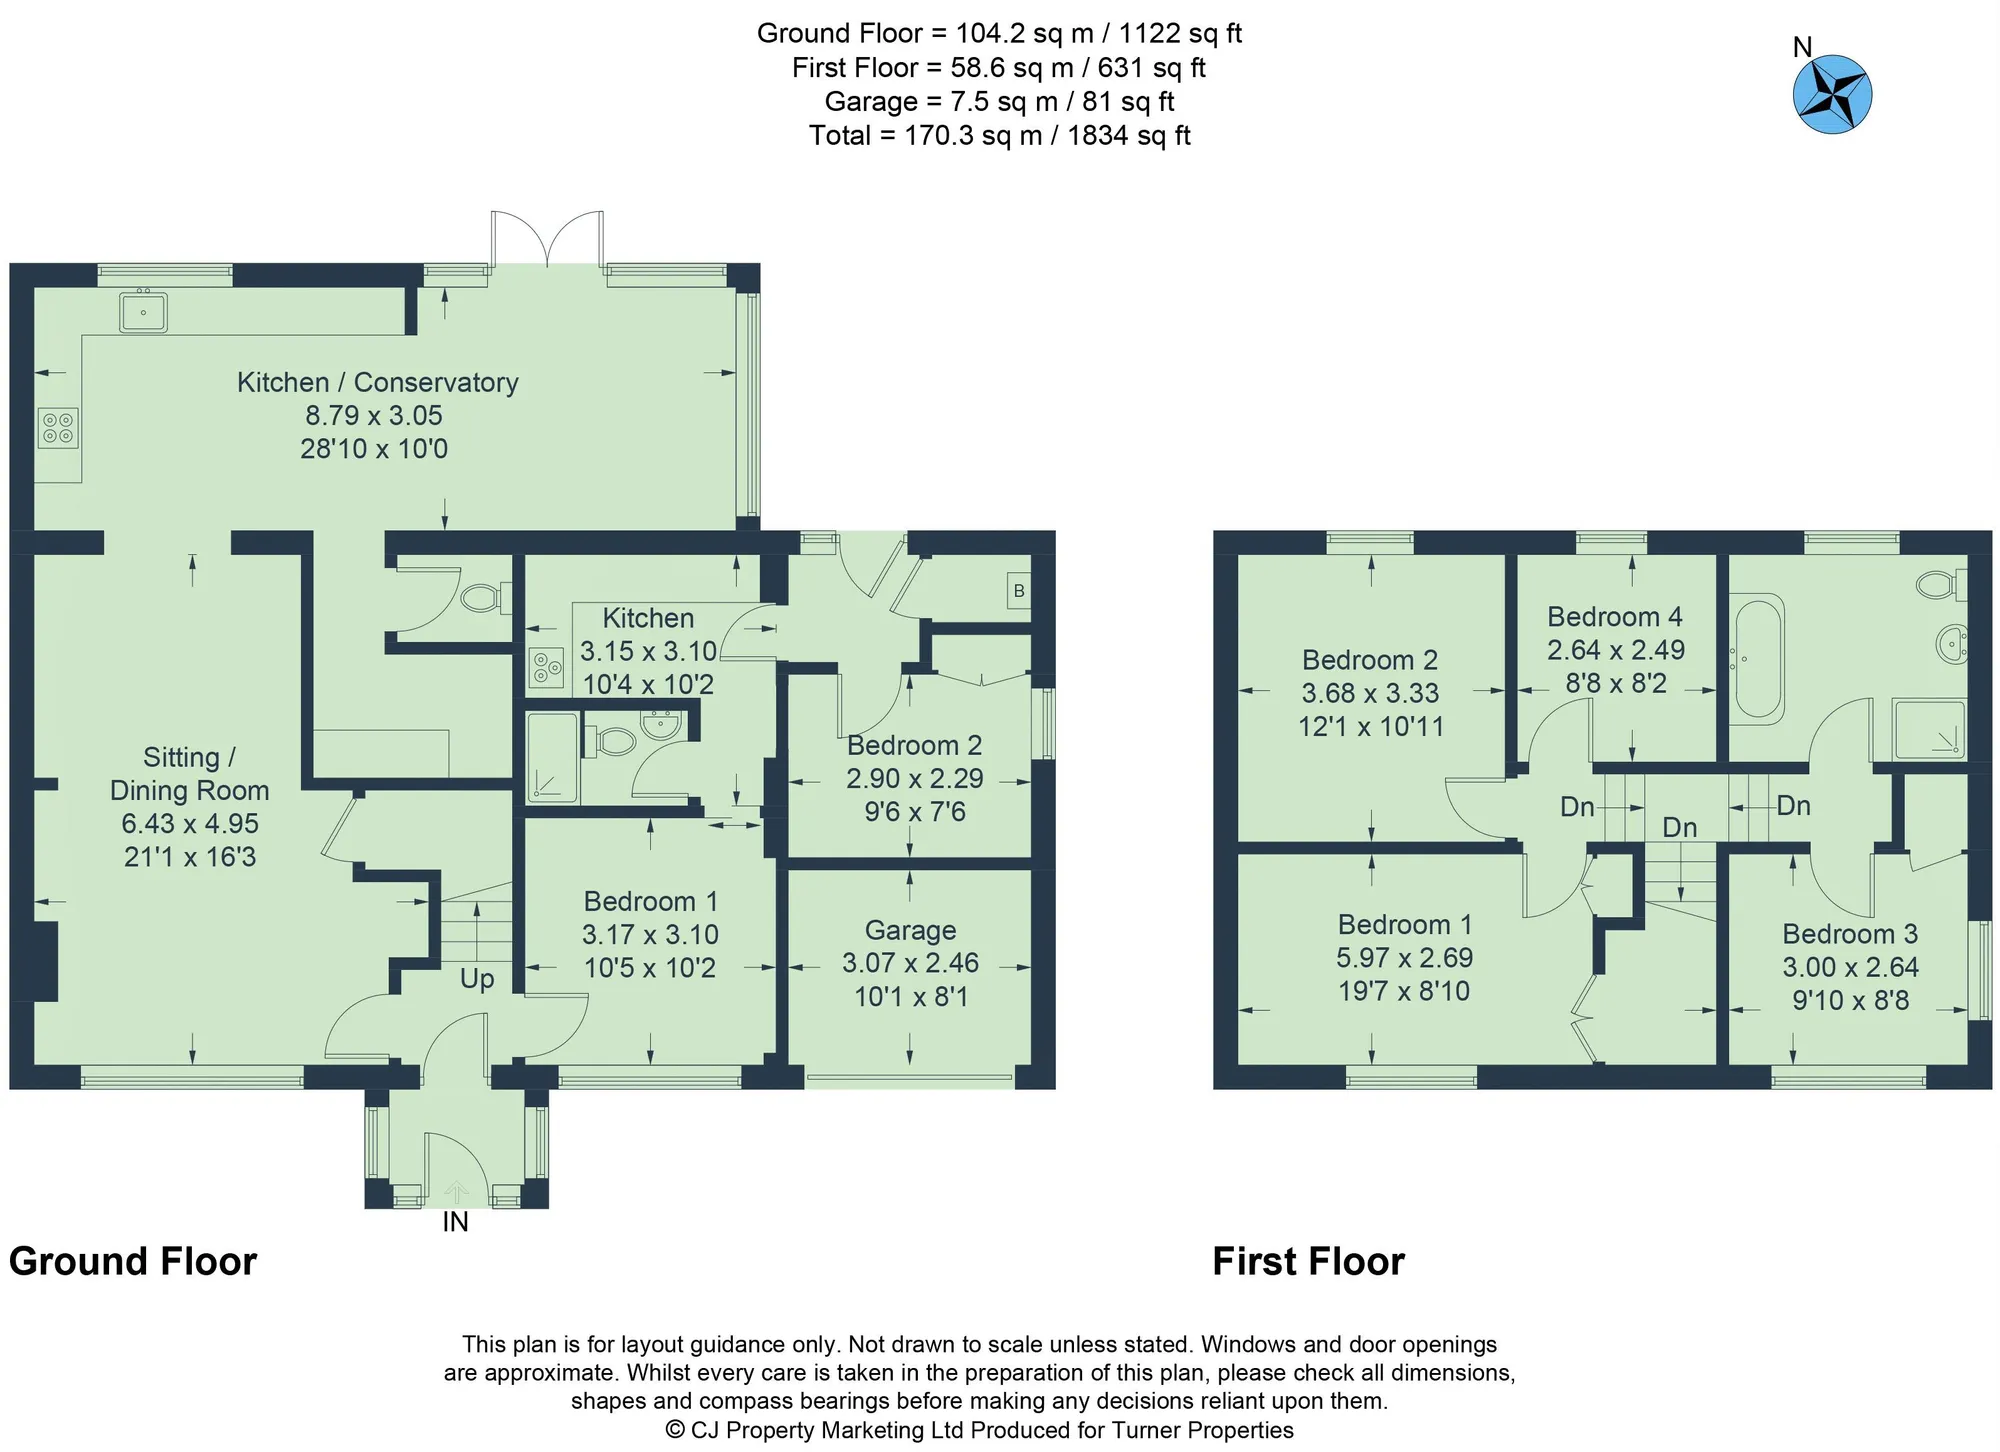 4 bed semi-detached house to rent in Lower End, Oxford - Property floorplan